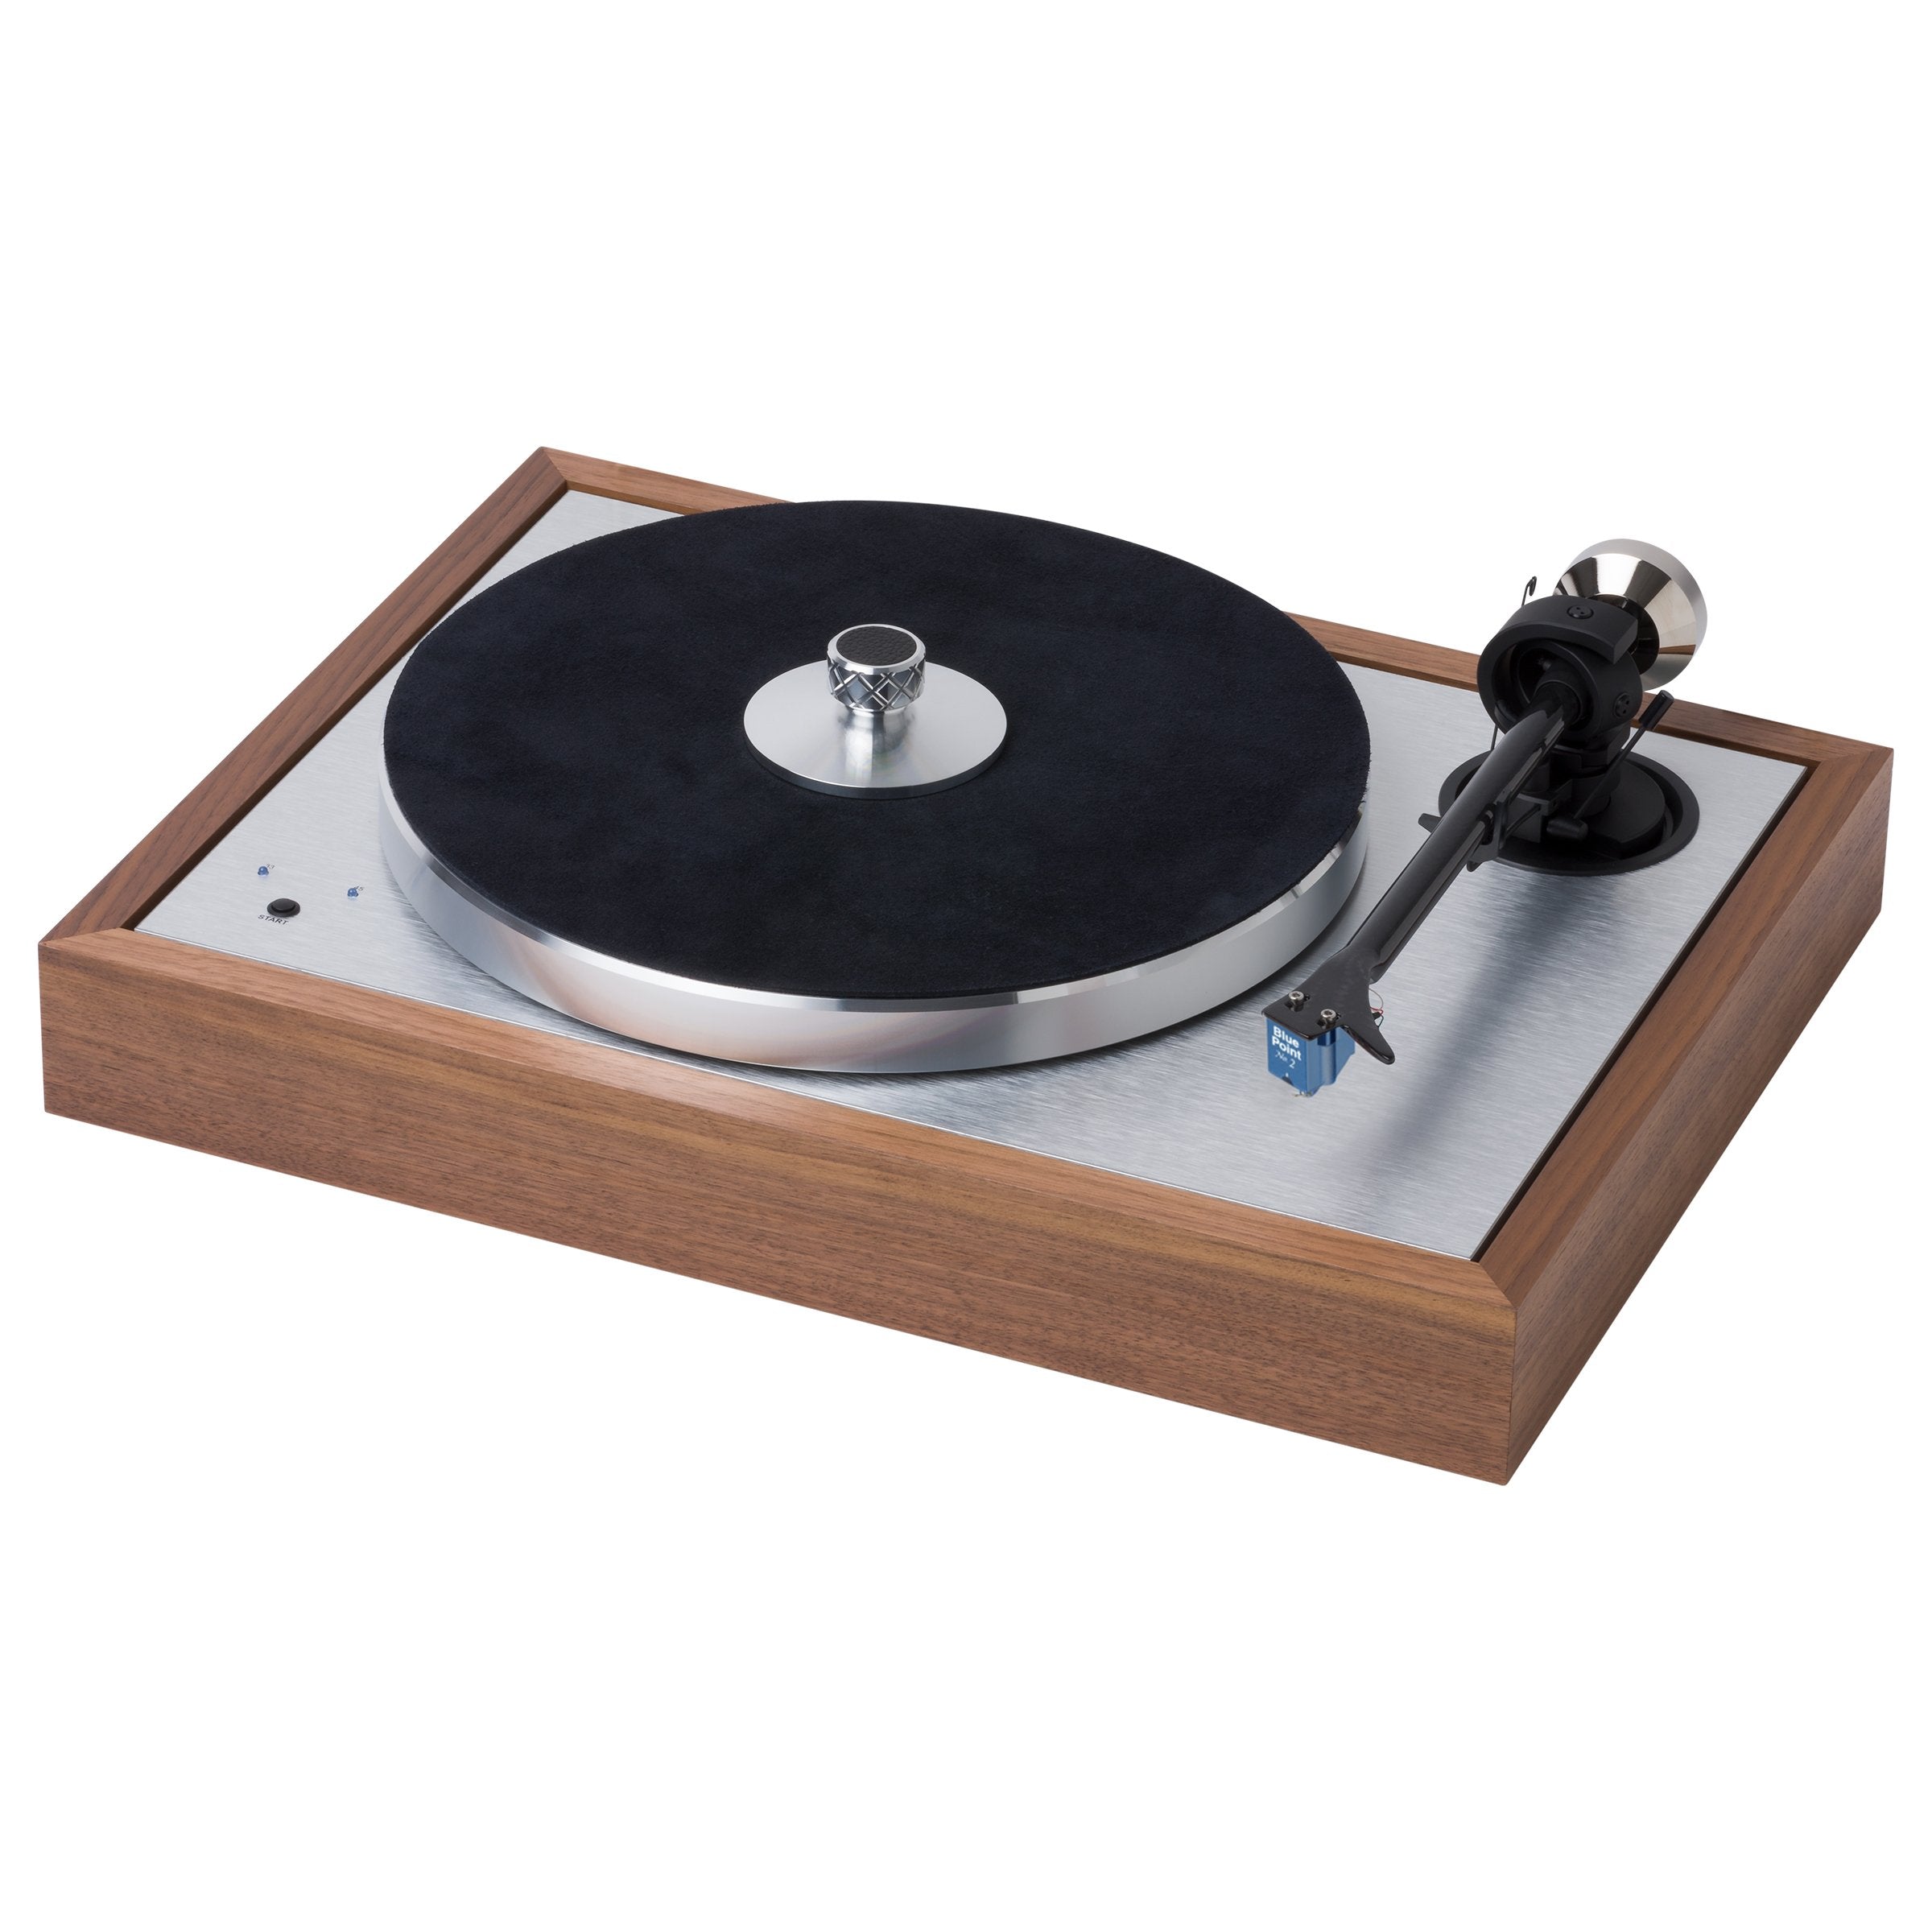 Pro-Ject: The Classic SB Turntable (Blue Point No.2) - Walnut